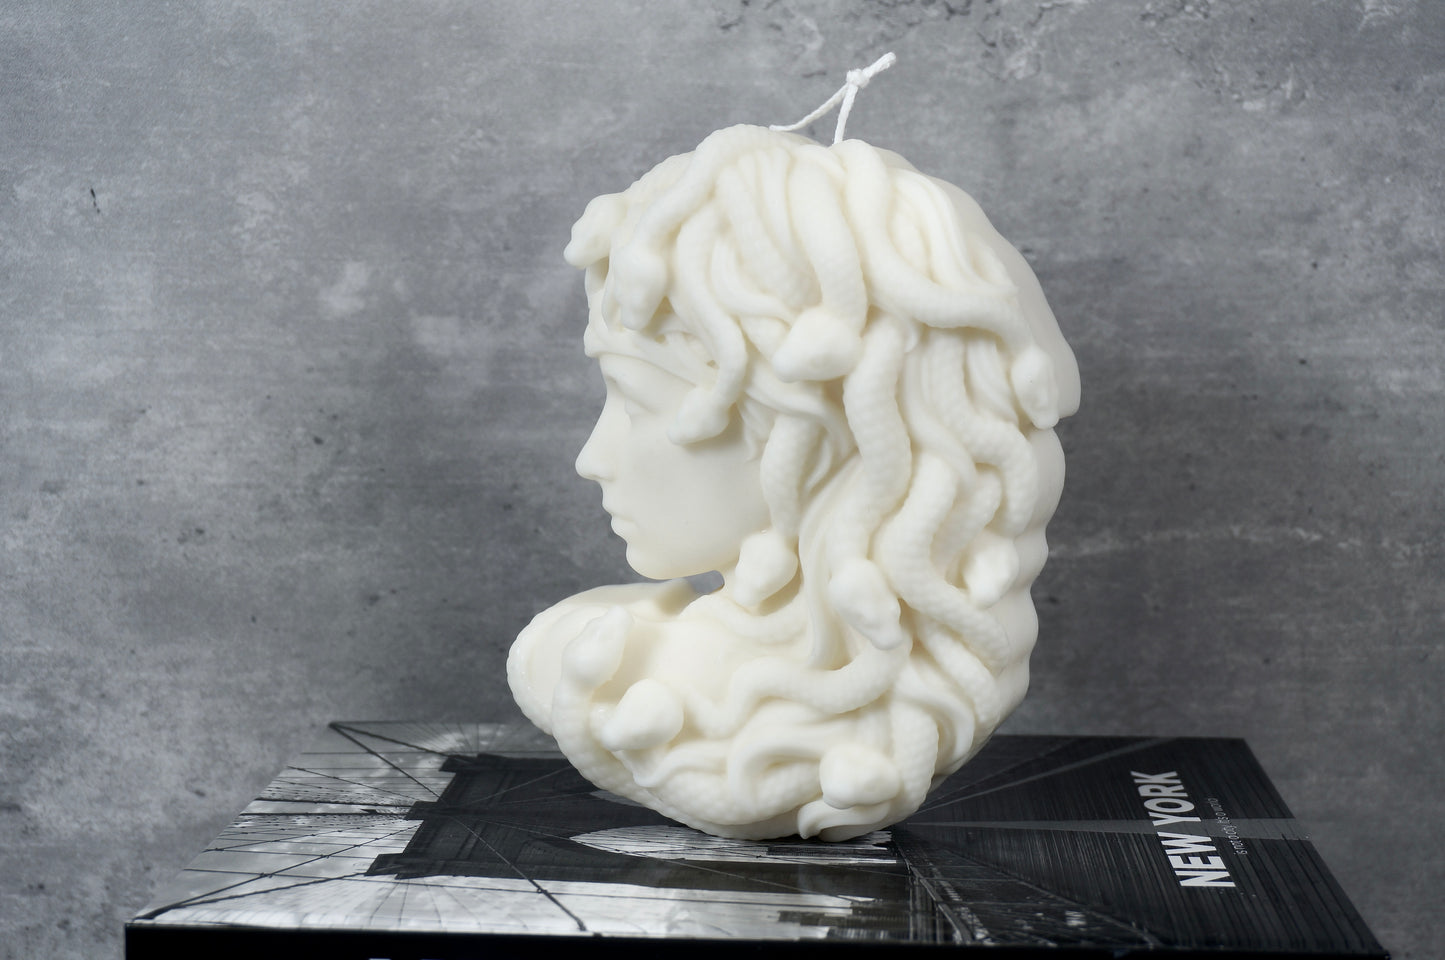 Medusa 3D Candle - Woman with snakes - Shaped Candle - Sculptural Candle - House warming Gift - Home Decor